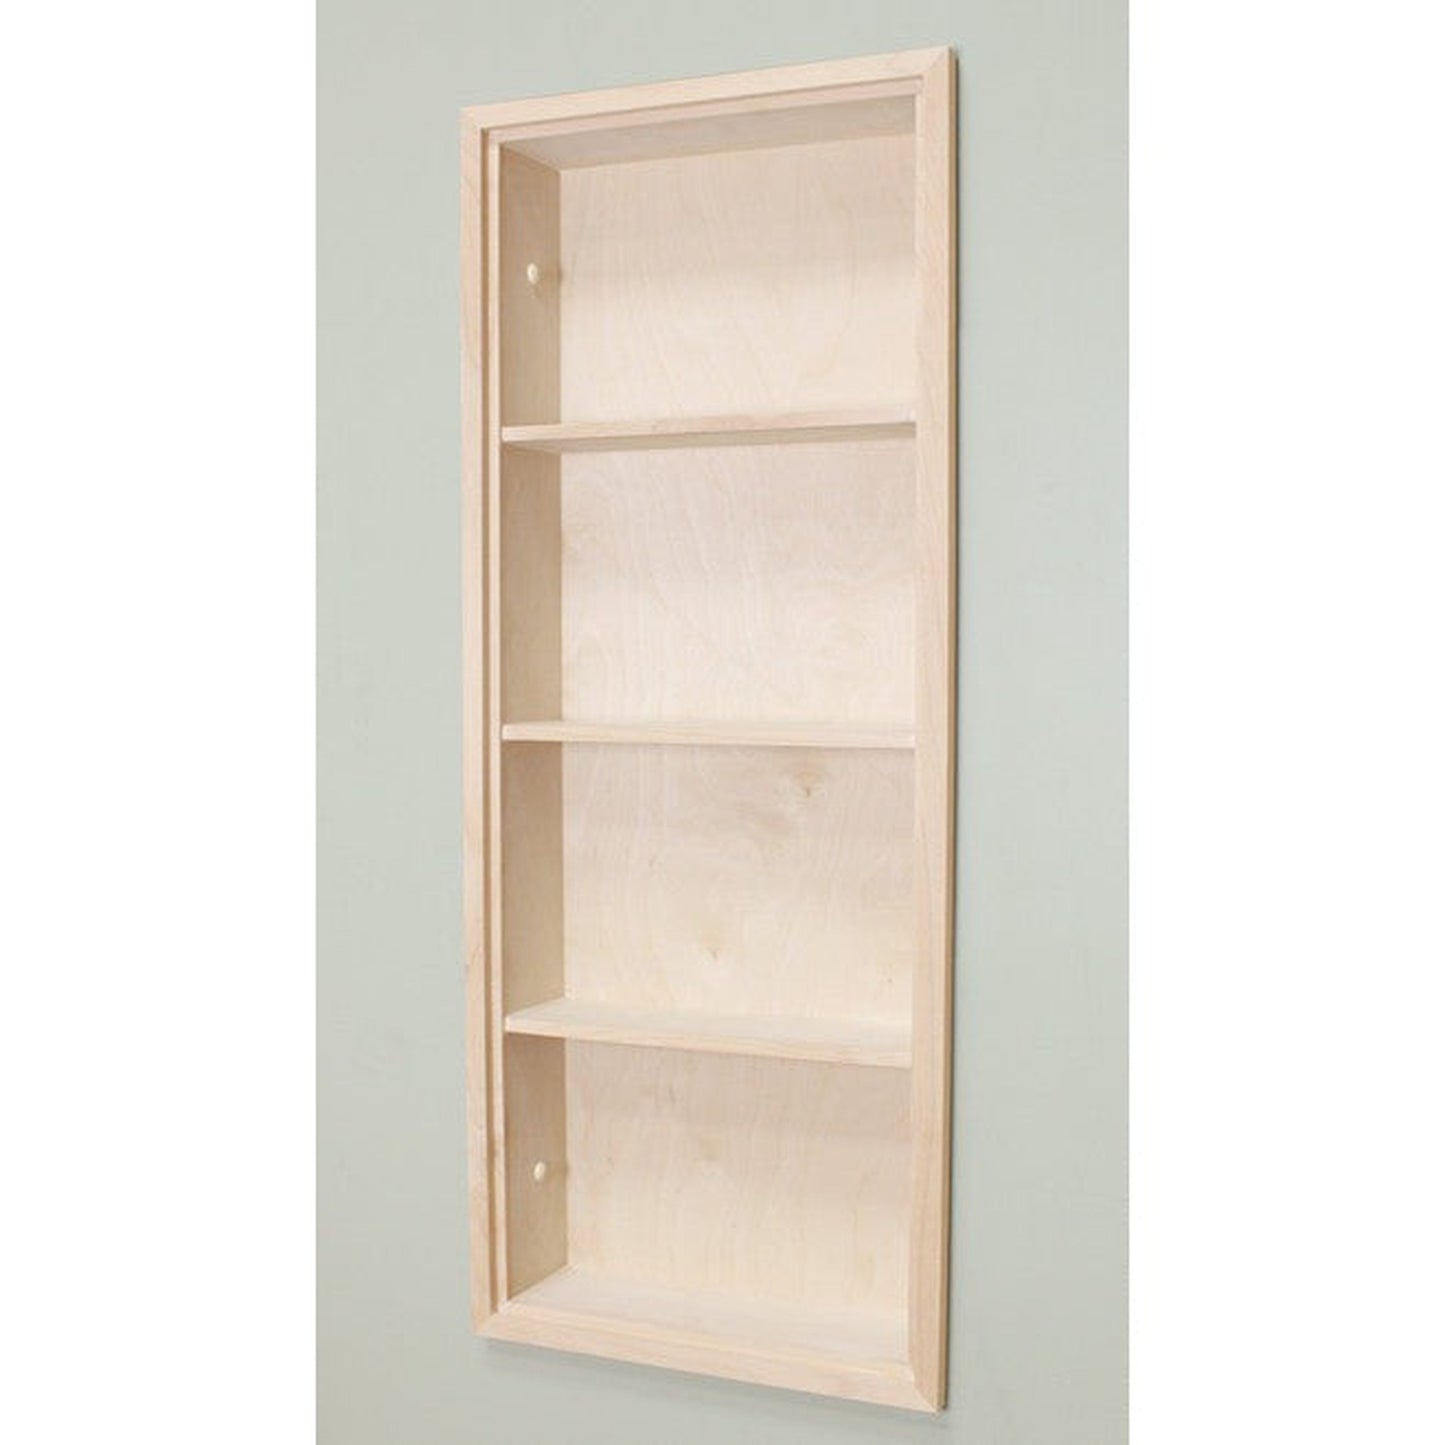 Fox Hollow Furnishings Aiden 14" x 36" Unfinished Recessed Sloane Wall Niche With Plain Back and Three Shelves